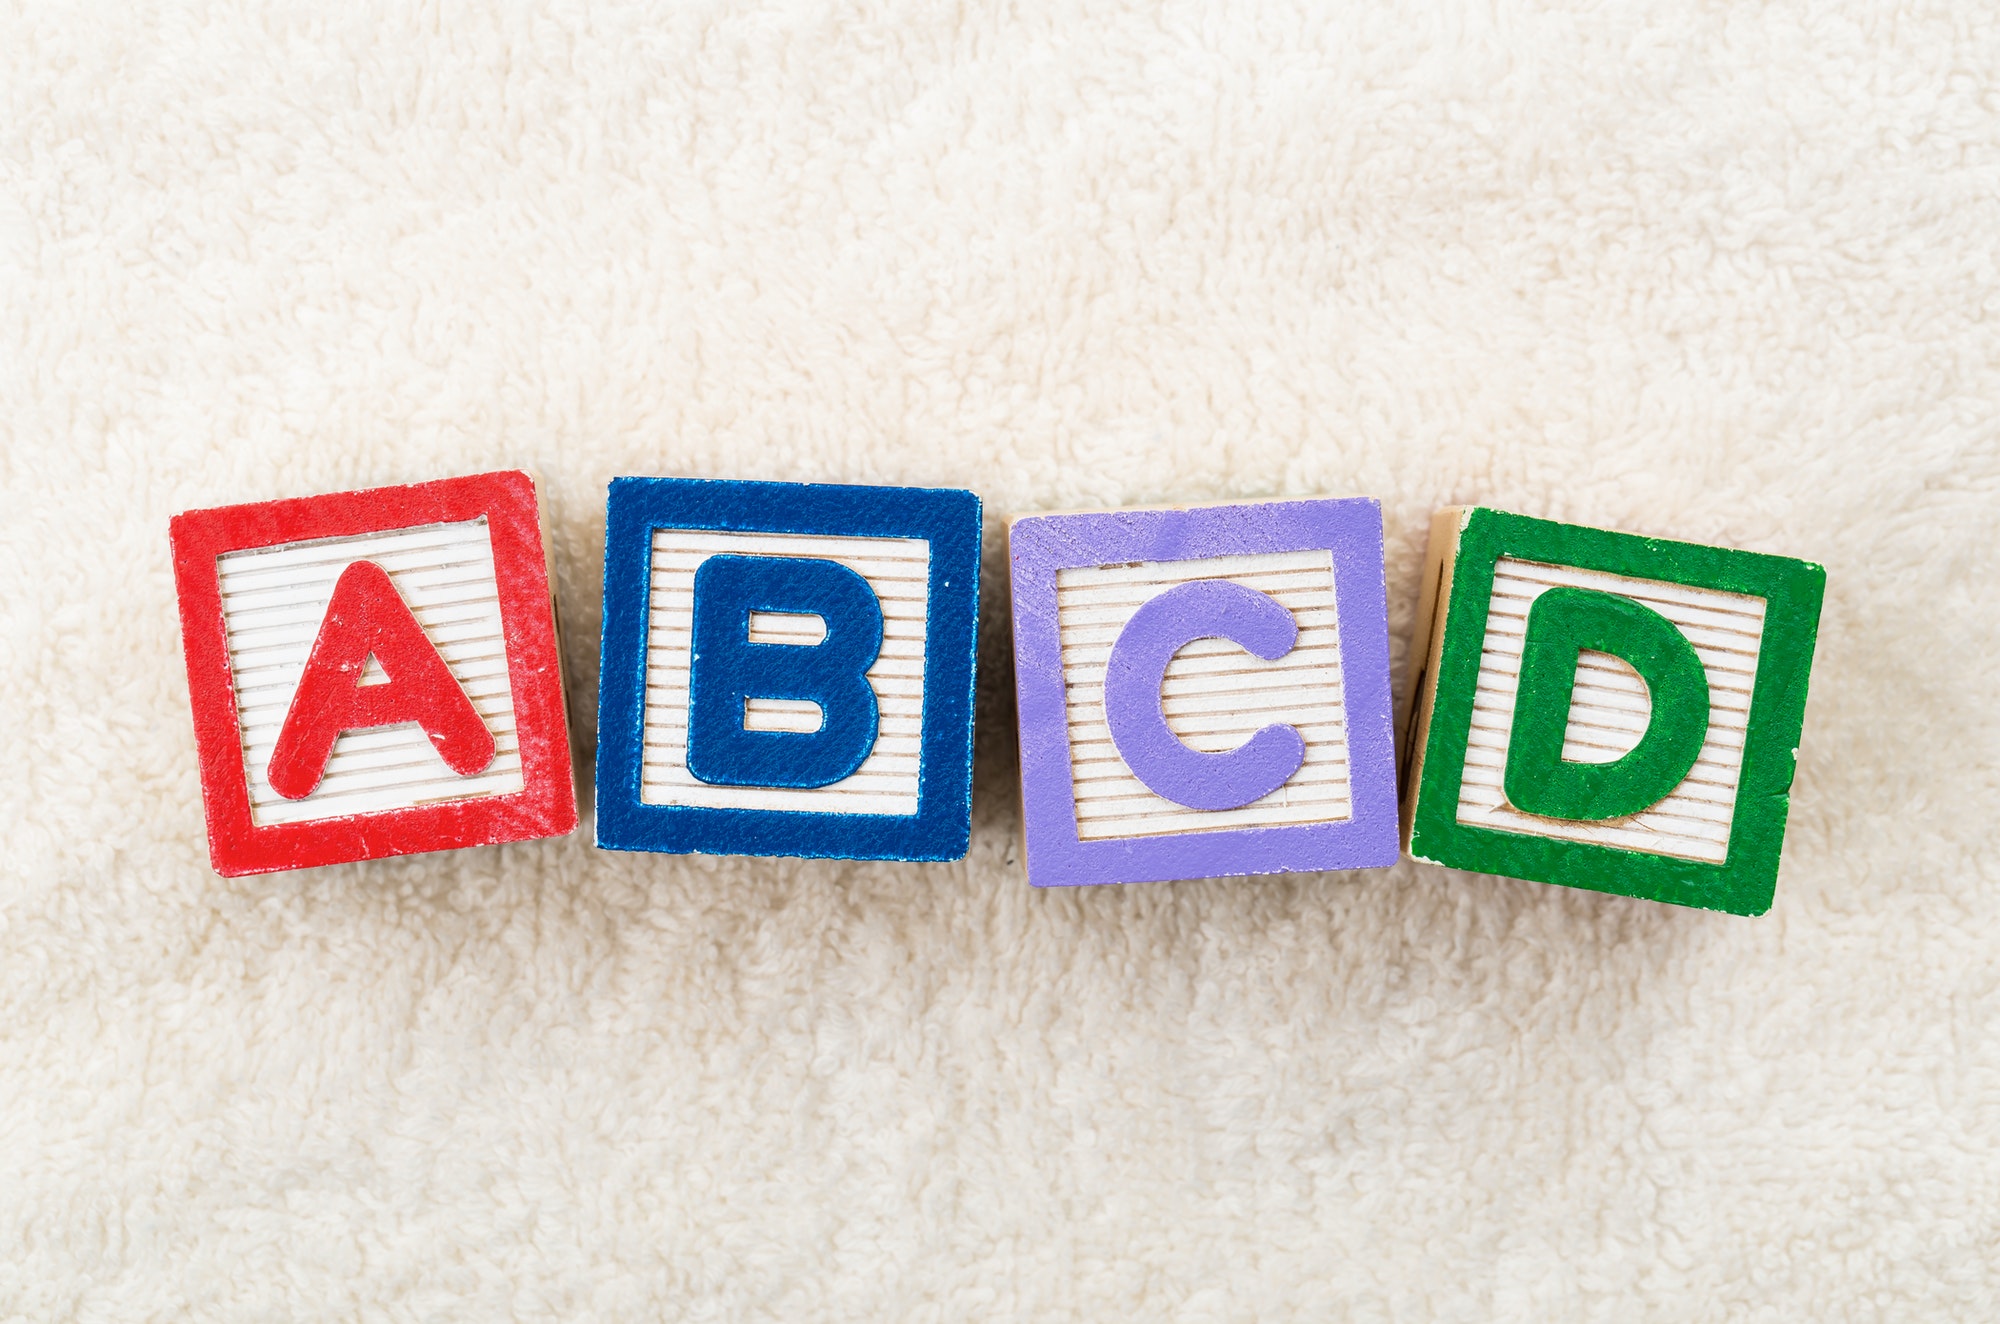 ABCD toy block representing the four Parst of Medicare